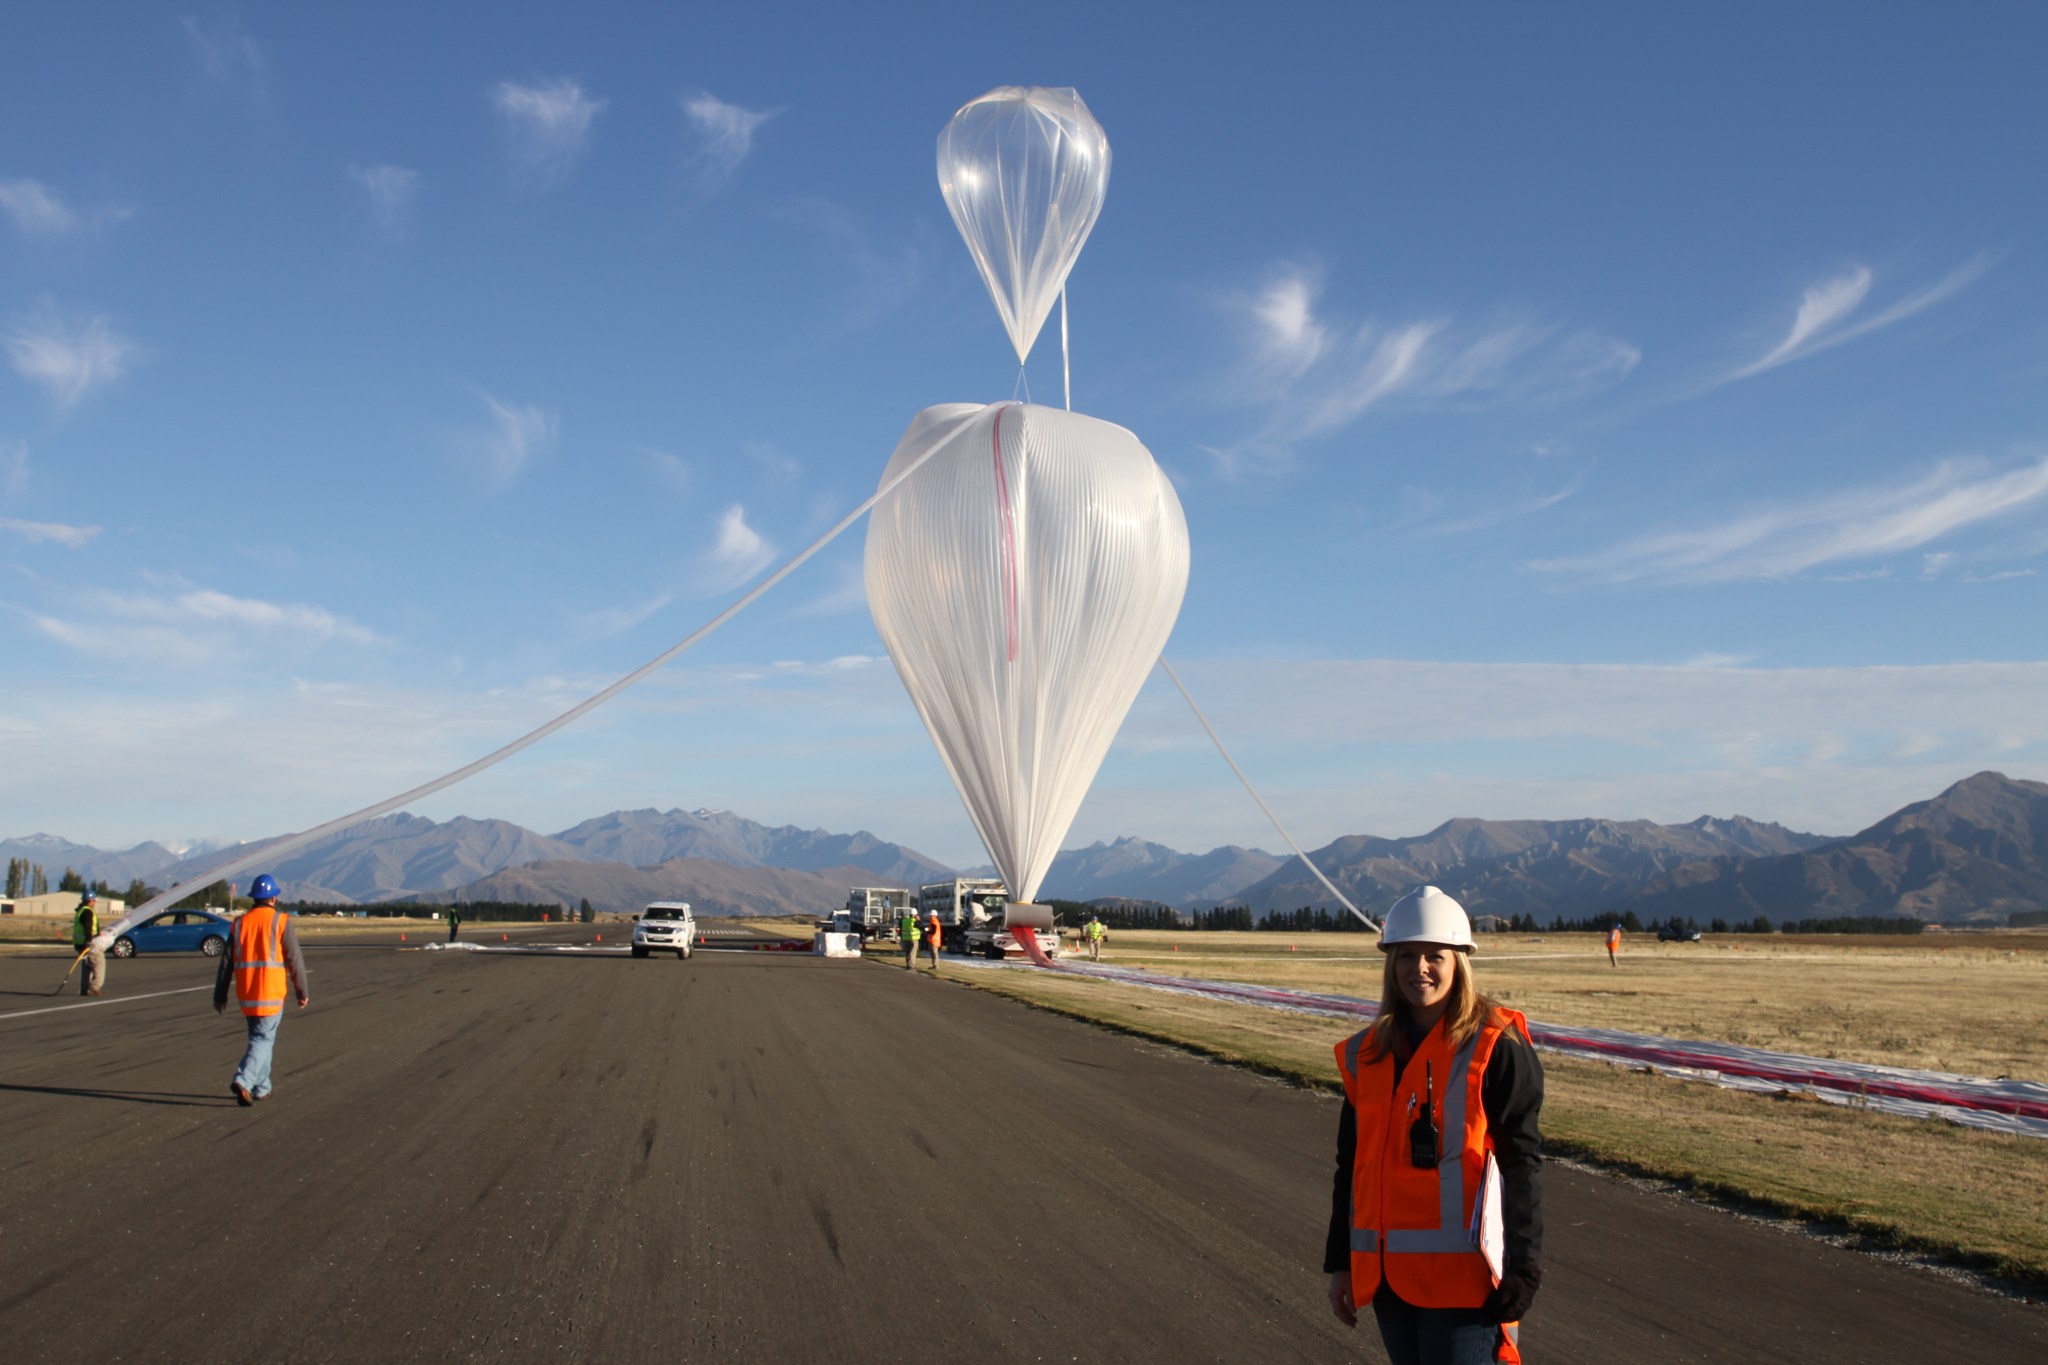 woman with blonde hair wears a hard hat and orange safety vest and is standing in front of two scientific balloons. The sky is blue with clouds and there are mountains in the background.